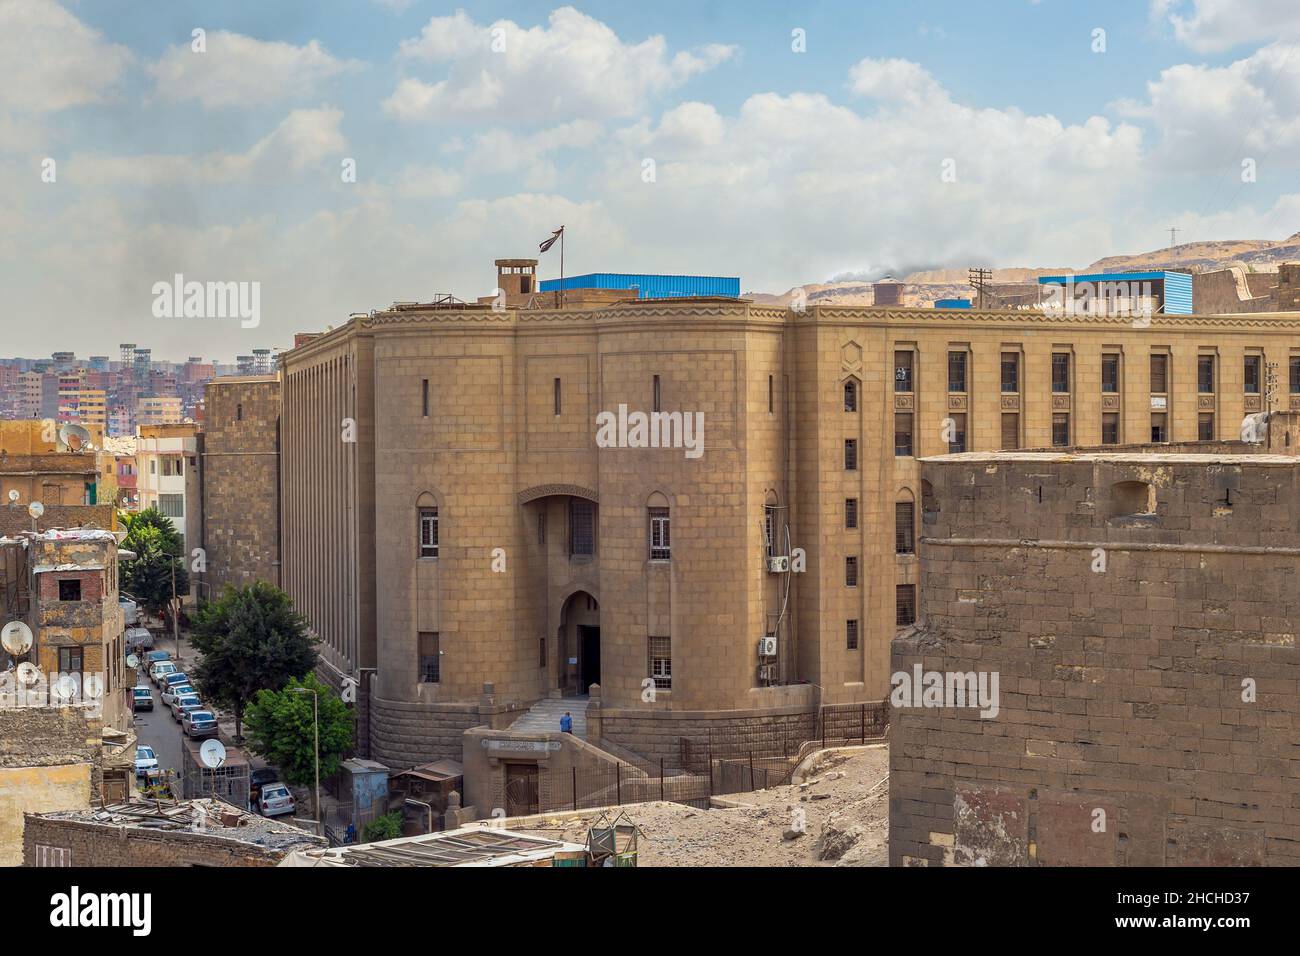 Cairo, Egypt - March 25 2021: The National Archives of Egypt, aka The Egyptian House of Documentation, or Dar El Mahfouzat, located in the Citadel of Cairo, built in 1828 Stock Photo